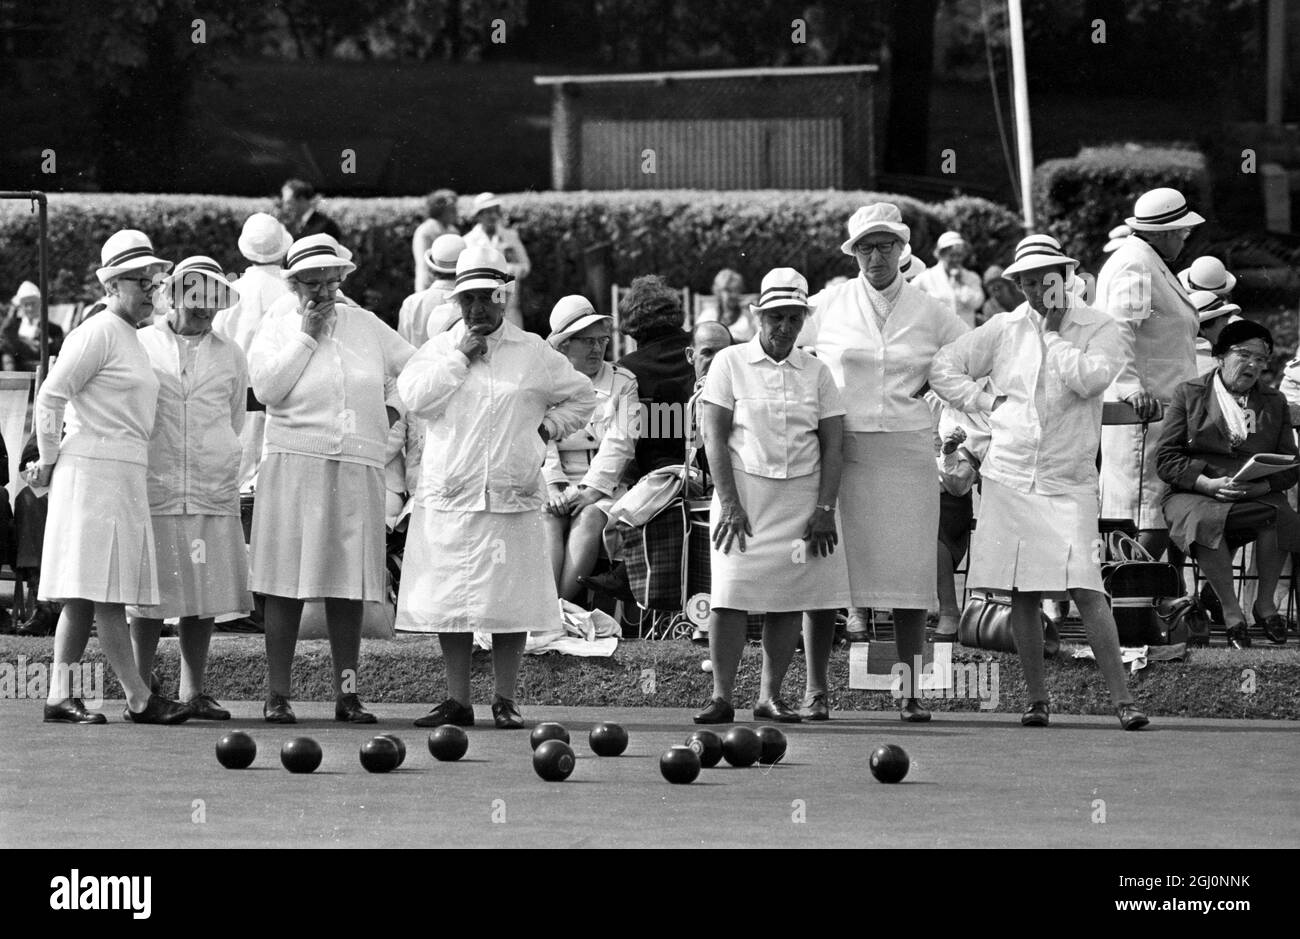 A woman raises her arm after her wood hit the jack or white ball as other members of her team look on , at the Amateur National Championships of the English Women's Bowling Association at Wimbledon Park , London , England . 25 August 1969 Stock Photo